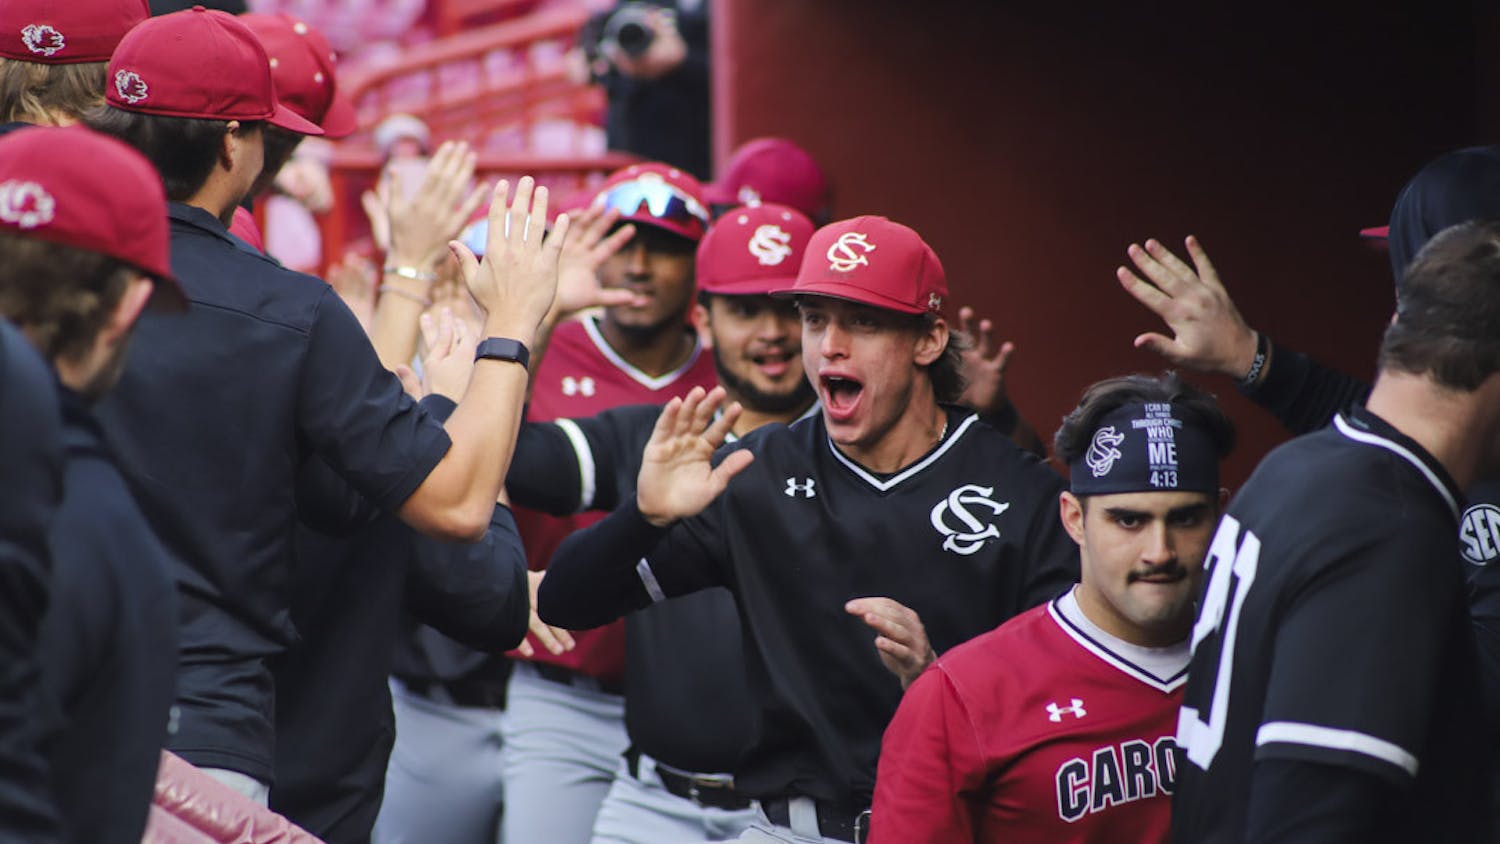 Players from team Black hype each other up after scoring the winning run during its first scrimmage of the 2023 season against team Garnet on Jan. 27. South Carolina baseball will start its 2023 season on Feb. 17 against the University of Massachusetts Lowell.